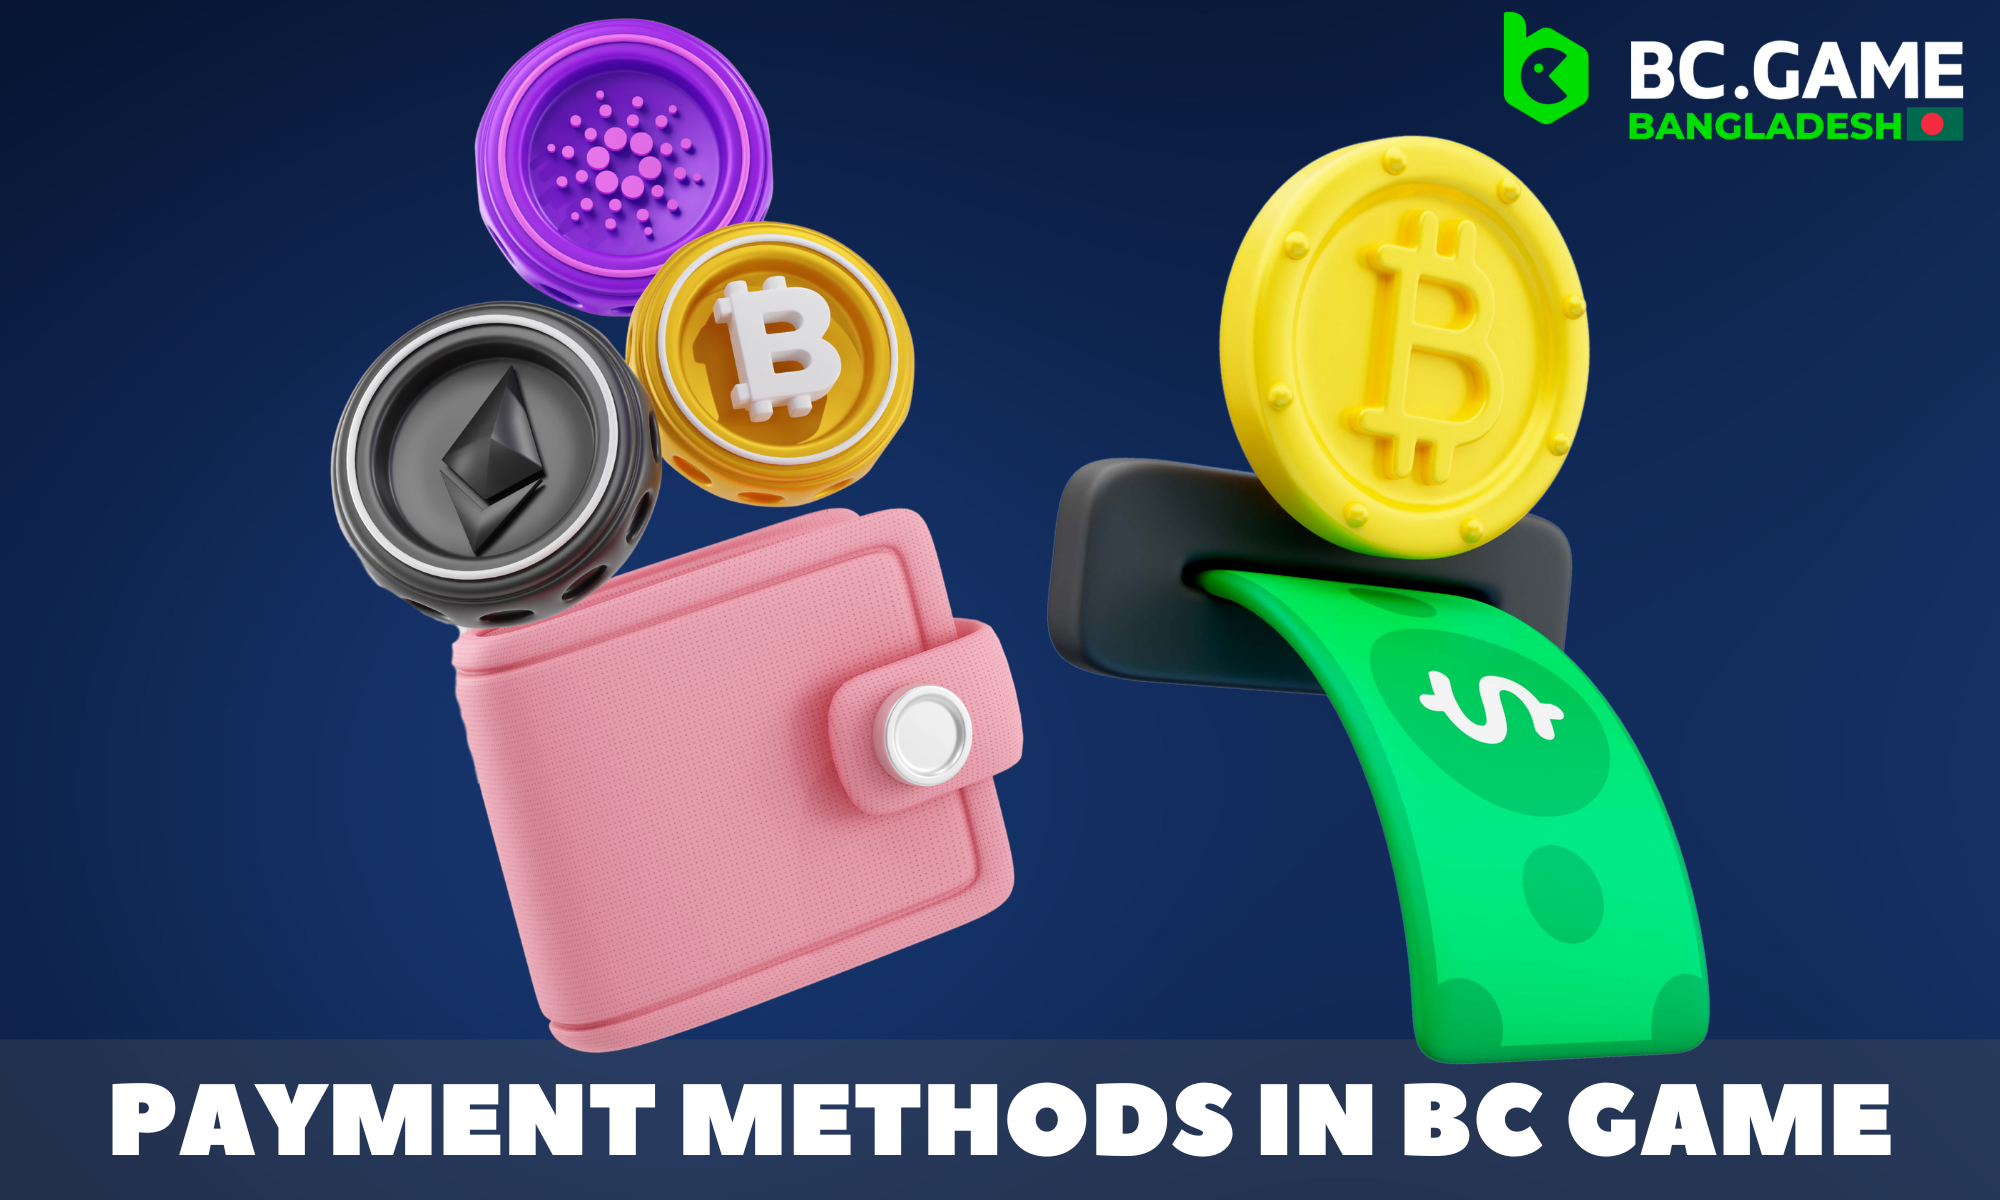 Payment methods on the BC Game bookmaker's website